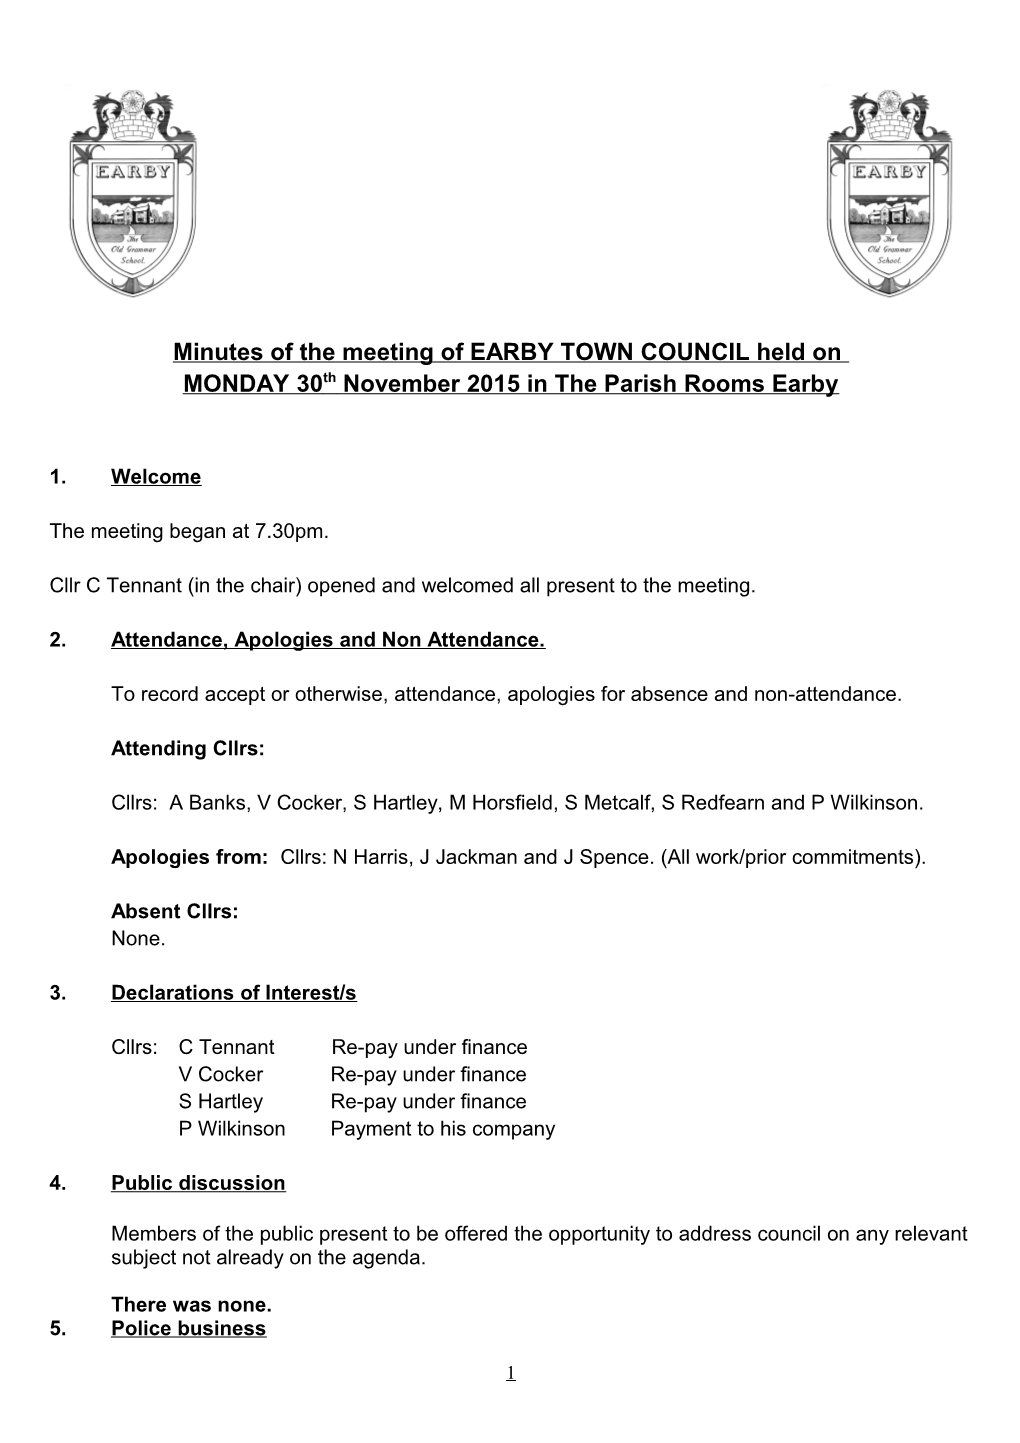 Minutes of the Meeting of EARBY TOWN COUNCIL Held On